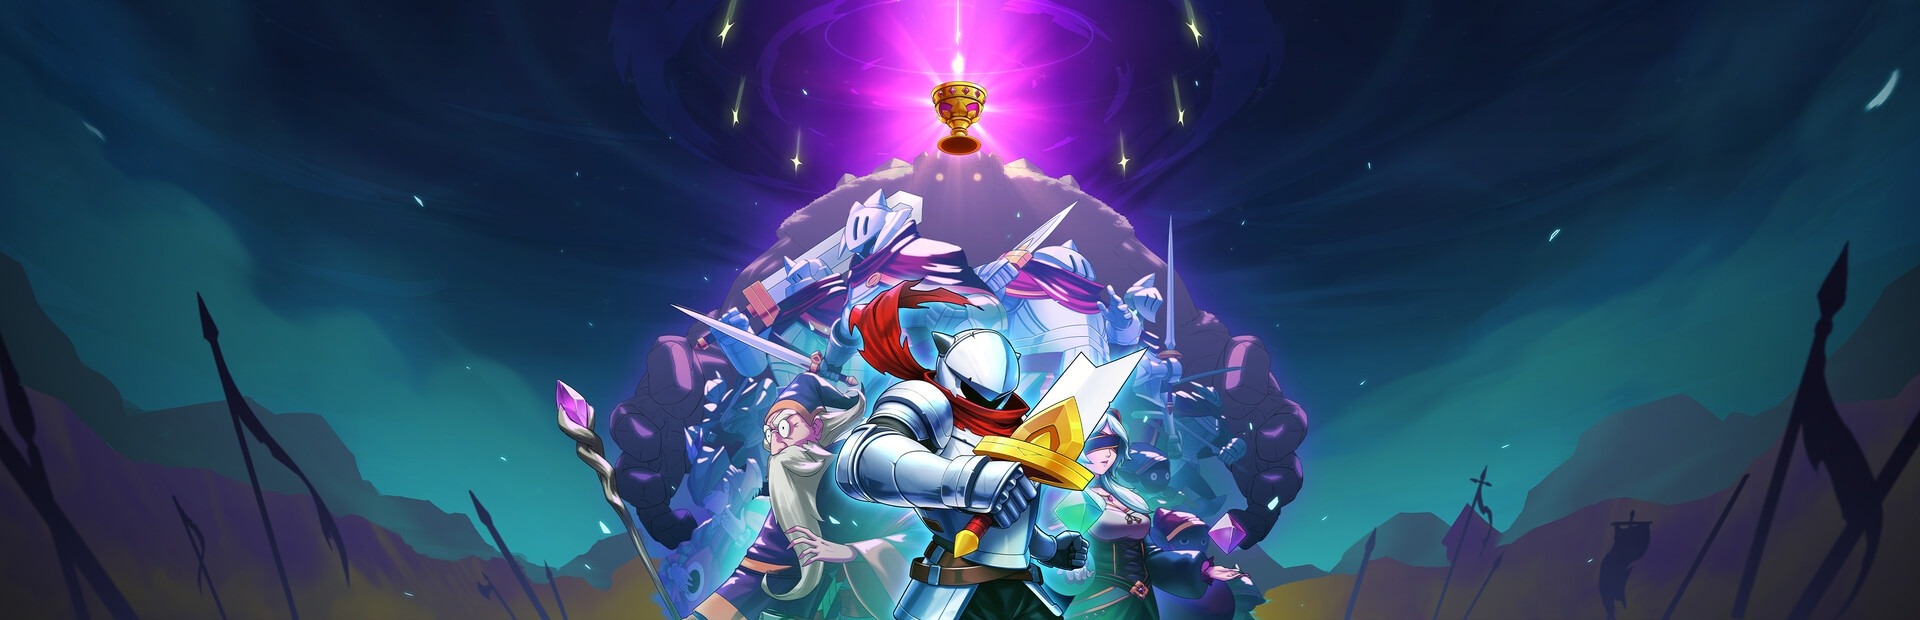 for iphone download Knight vs Giant: The Broken Excalibur free